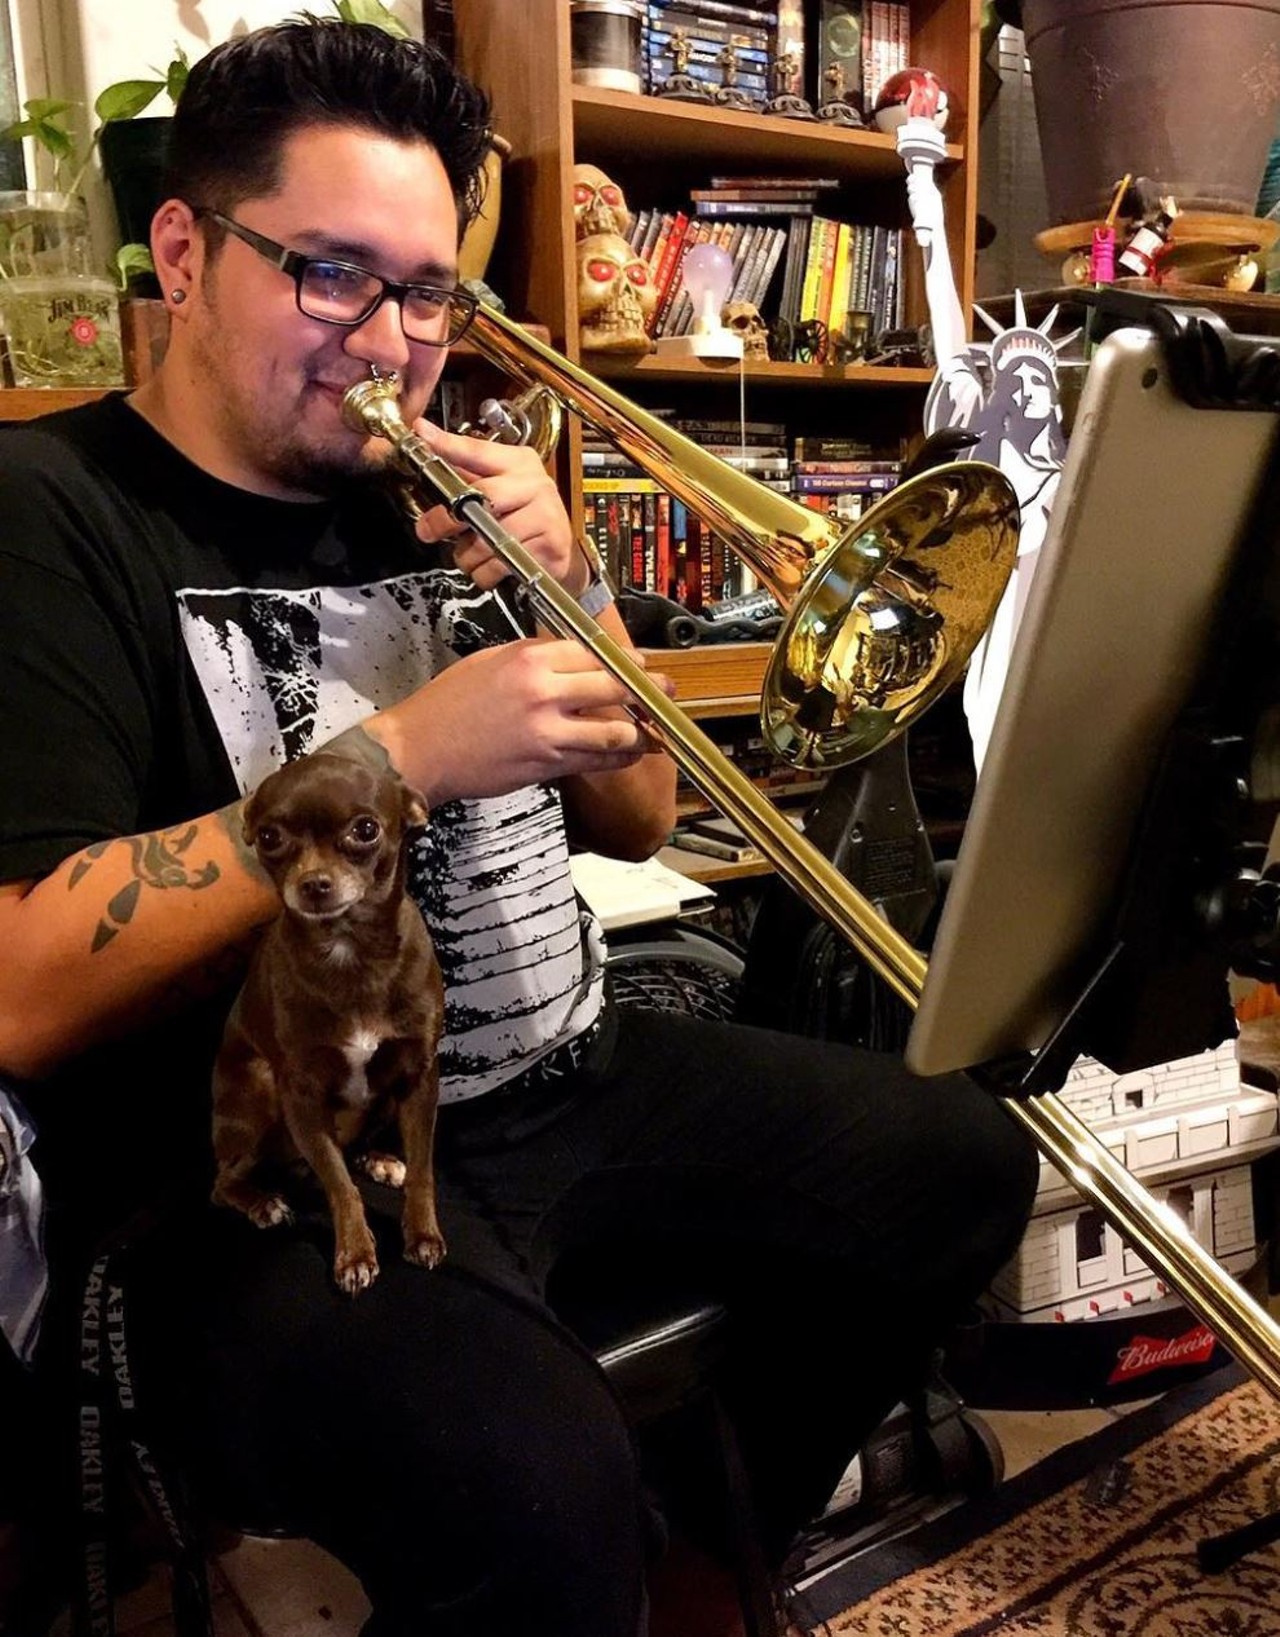 Julian Escobedo aka JulesTheHuman
Hosting a variety of content such as influencer-related how-tos, various tags, story times, movie reviews, and memes of the month, Julian Escobedo is a person of many interests. Did you know he can also play the trombone?
Photo via Instagram / julesthehuman